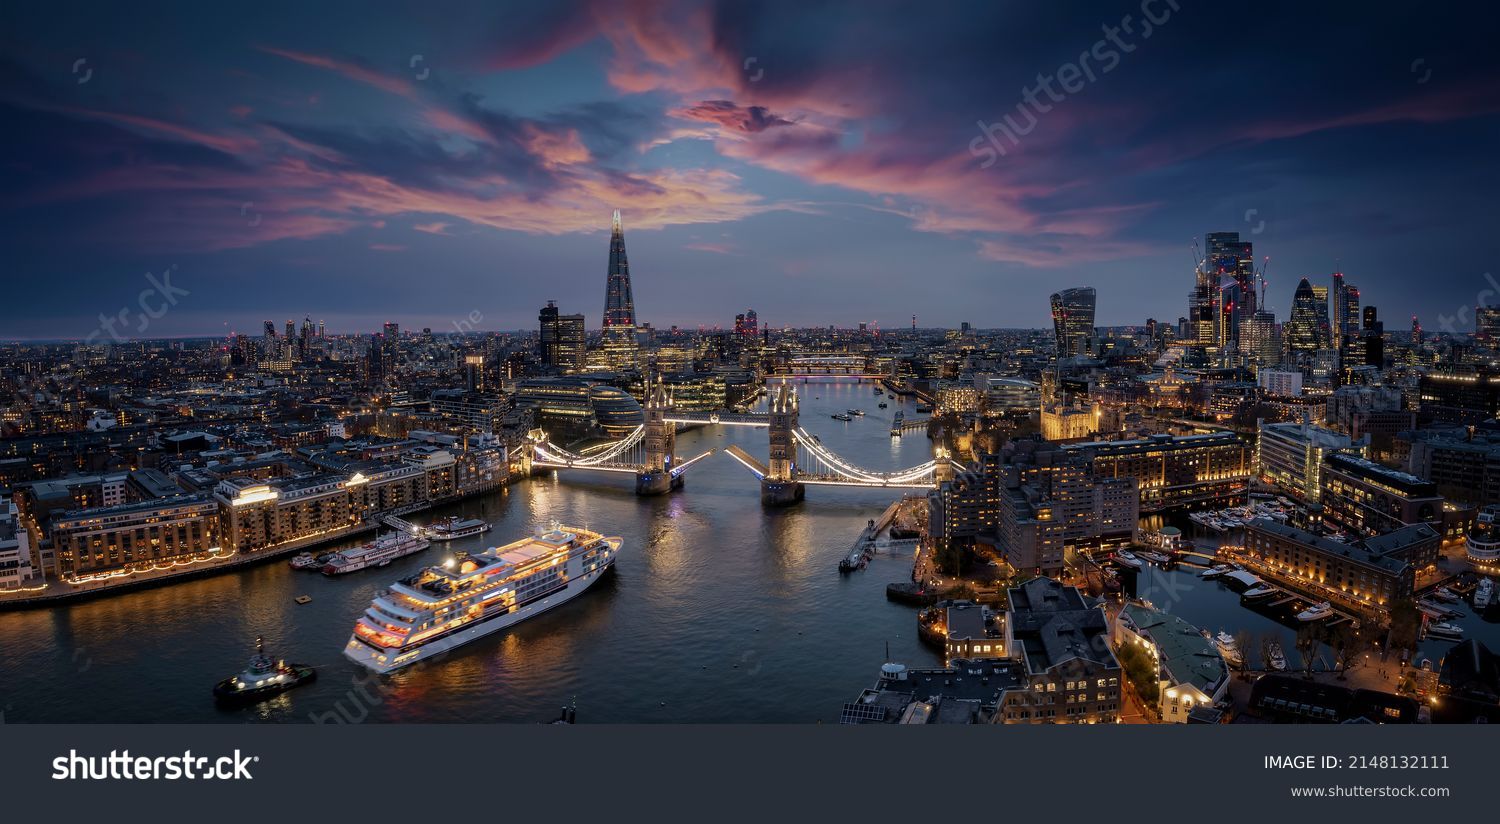 Panoramic, aerial view of the skyline of London with a motion blurred cruise ship passing under the lifted Tower Bridge during dusk, England #2148132111